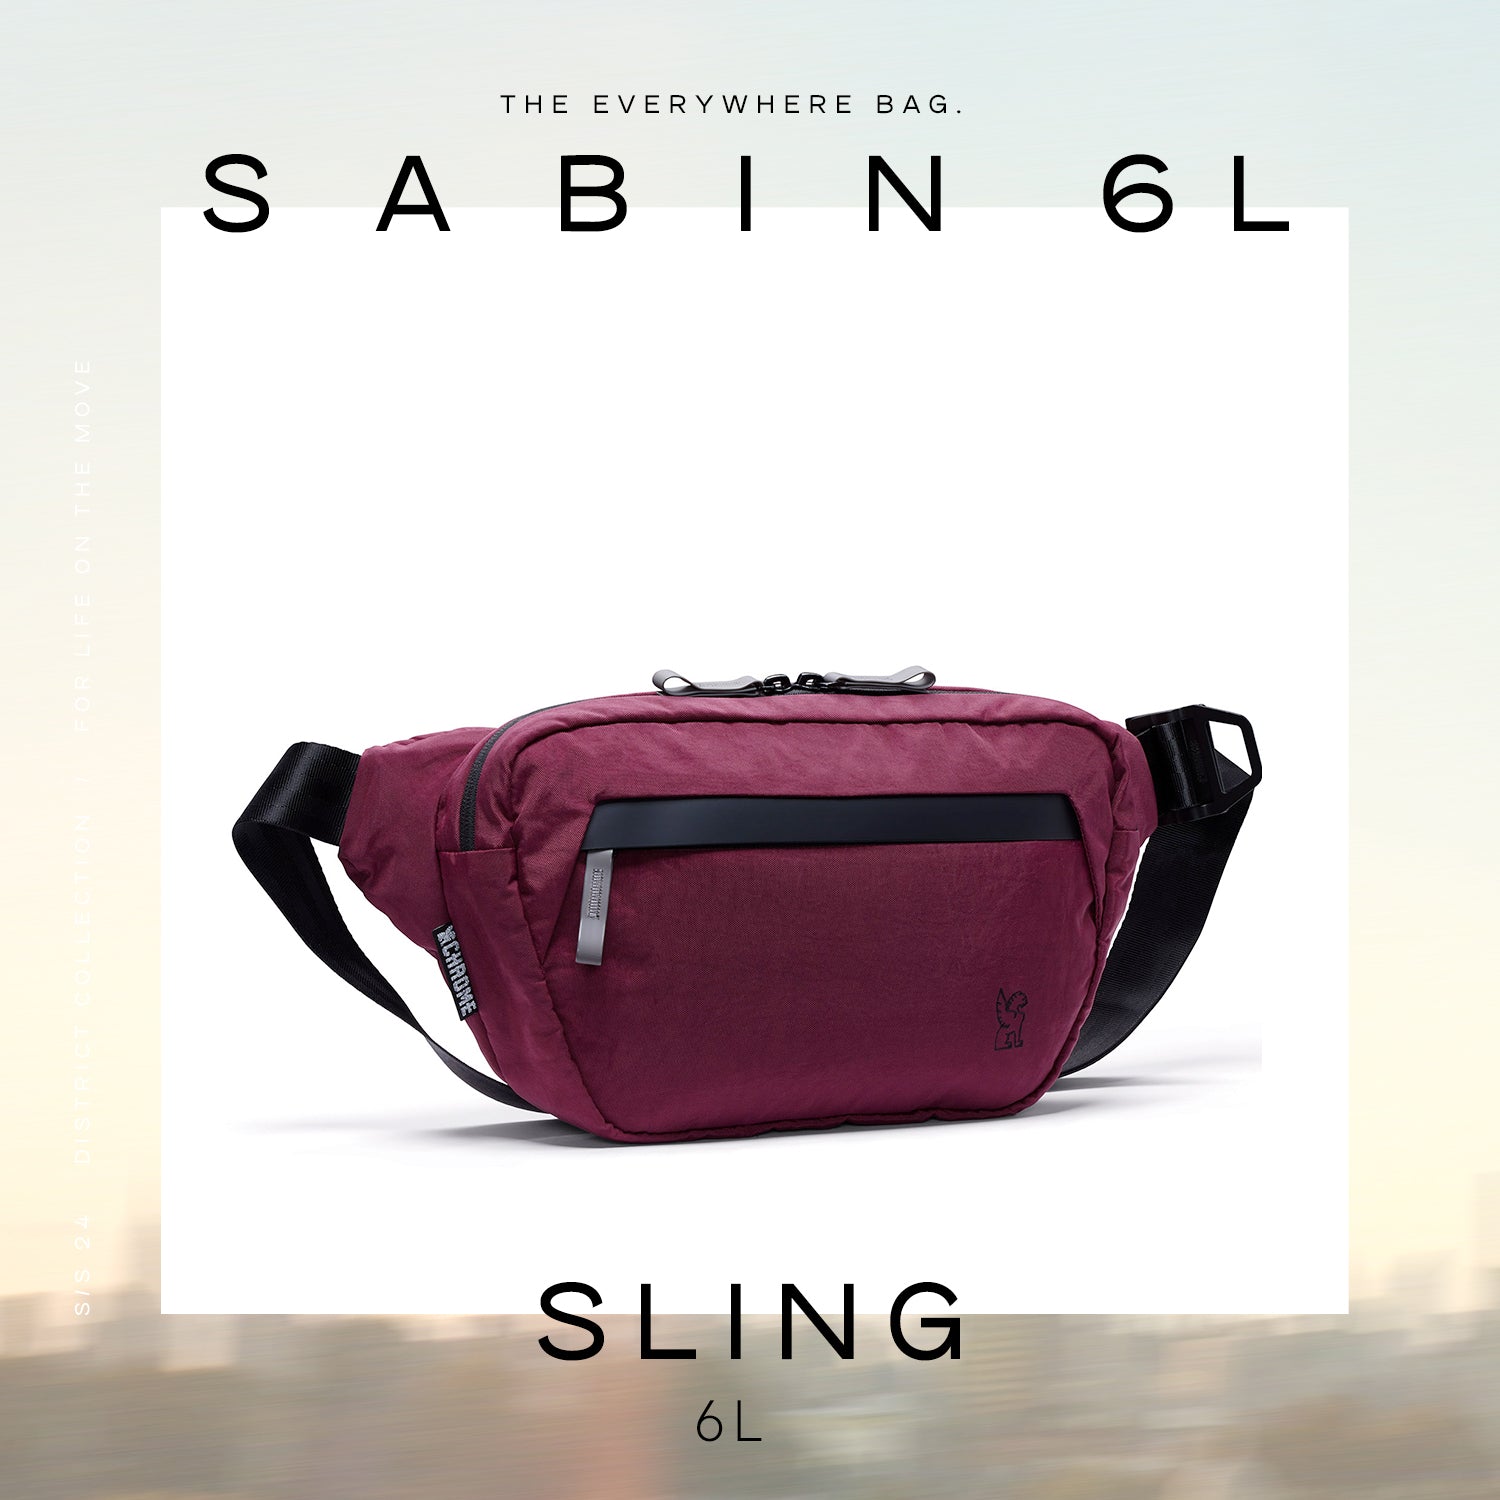 Sabin 6L Sling in royale, part of the district collection